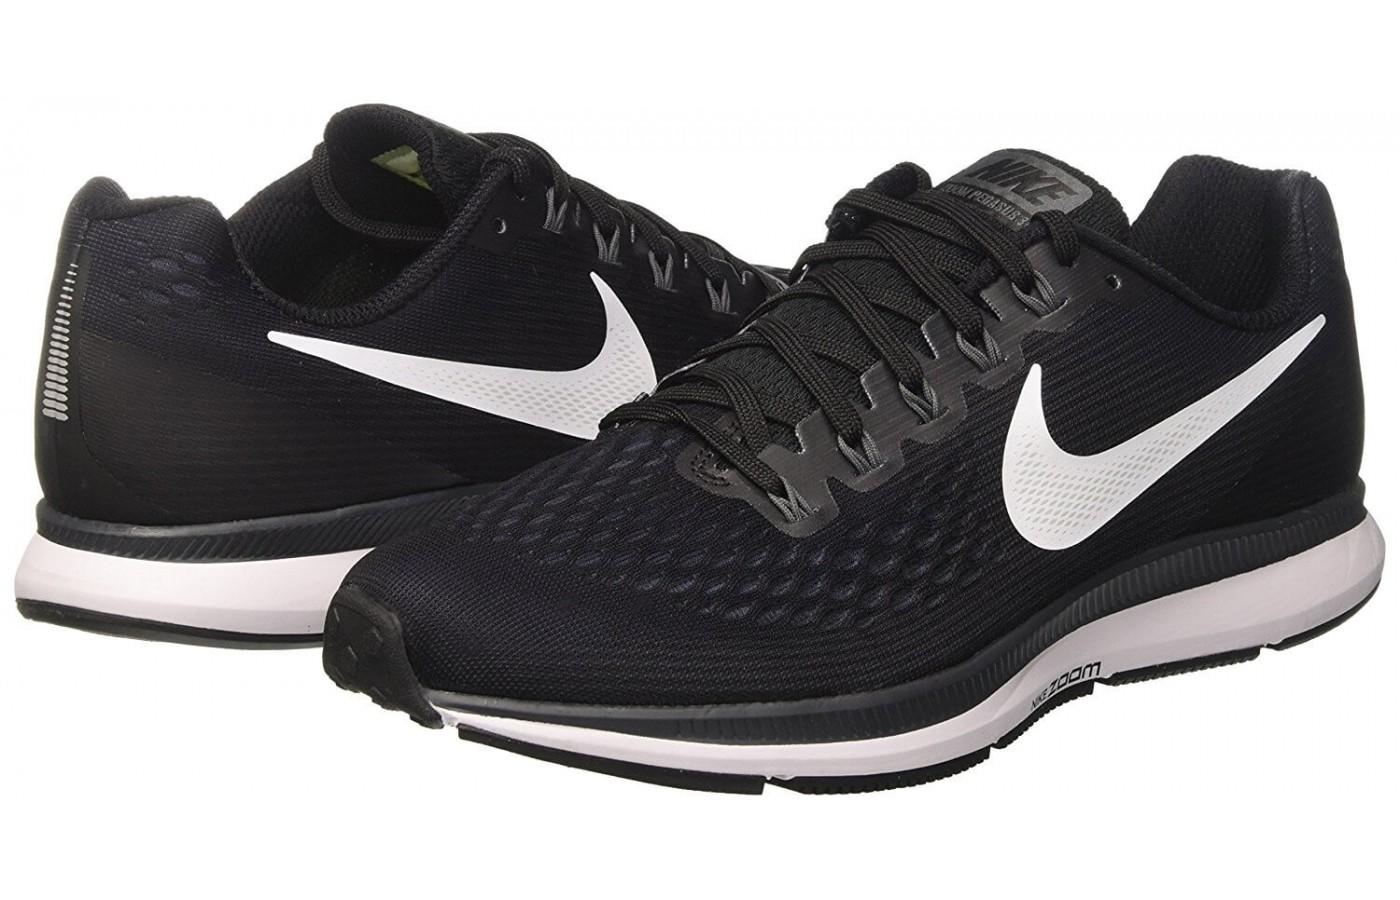 the Nike Air Zoom Pegasus 34 is a great overall running shoe